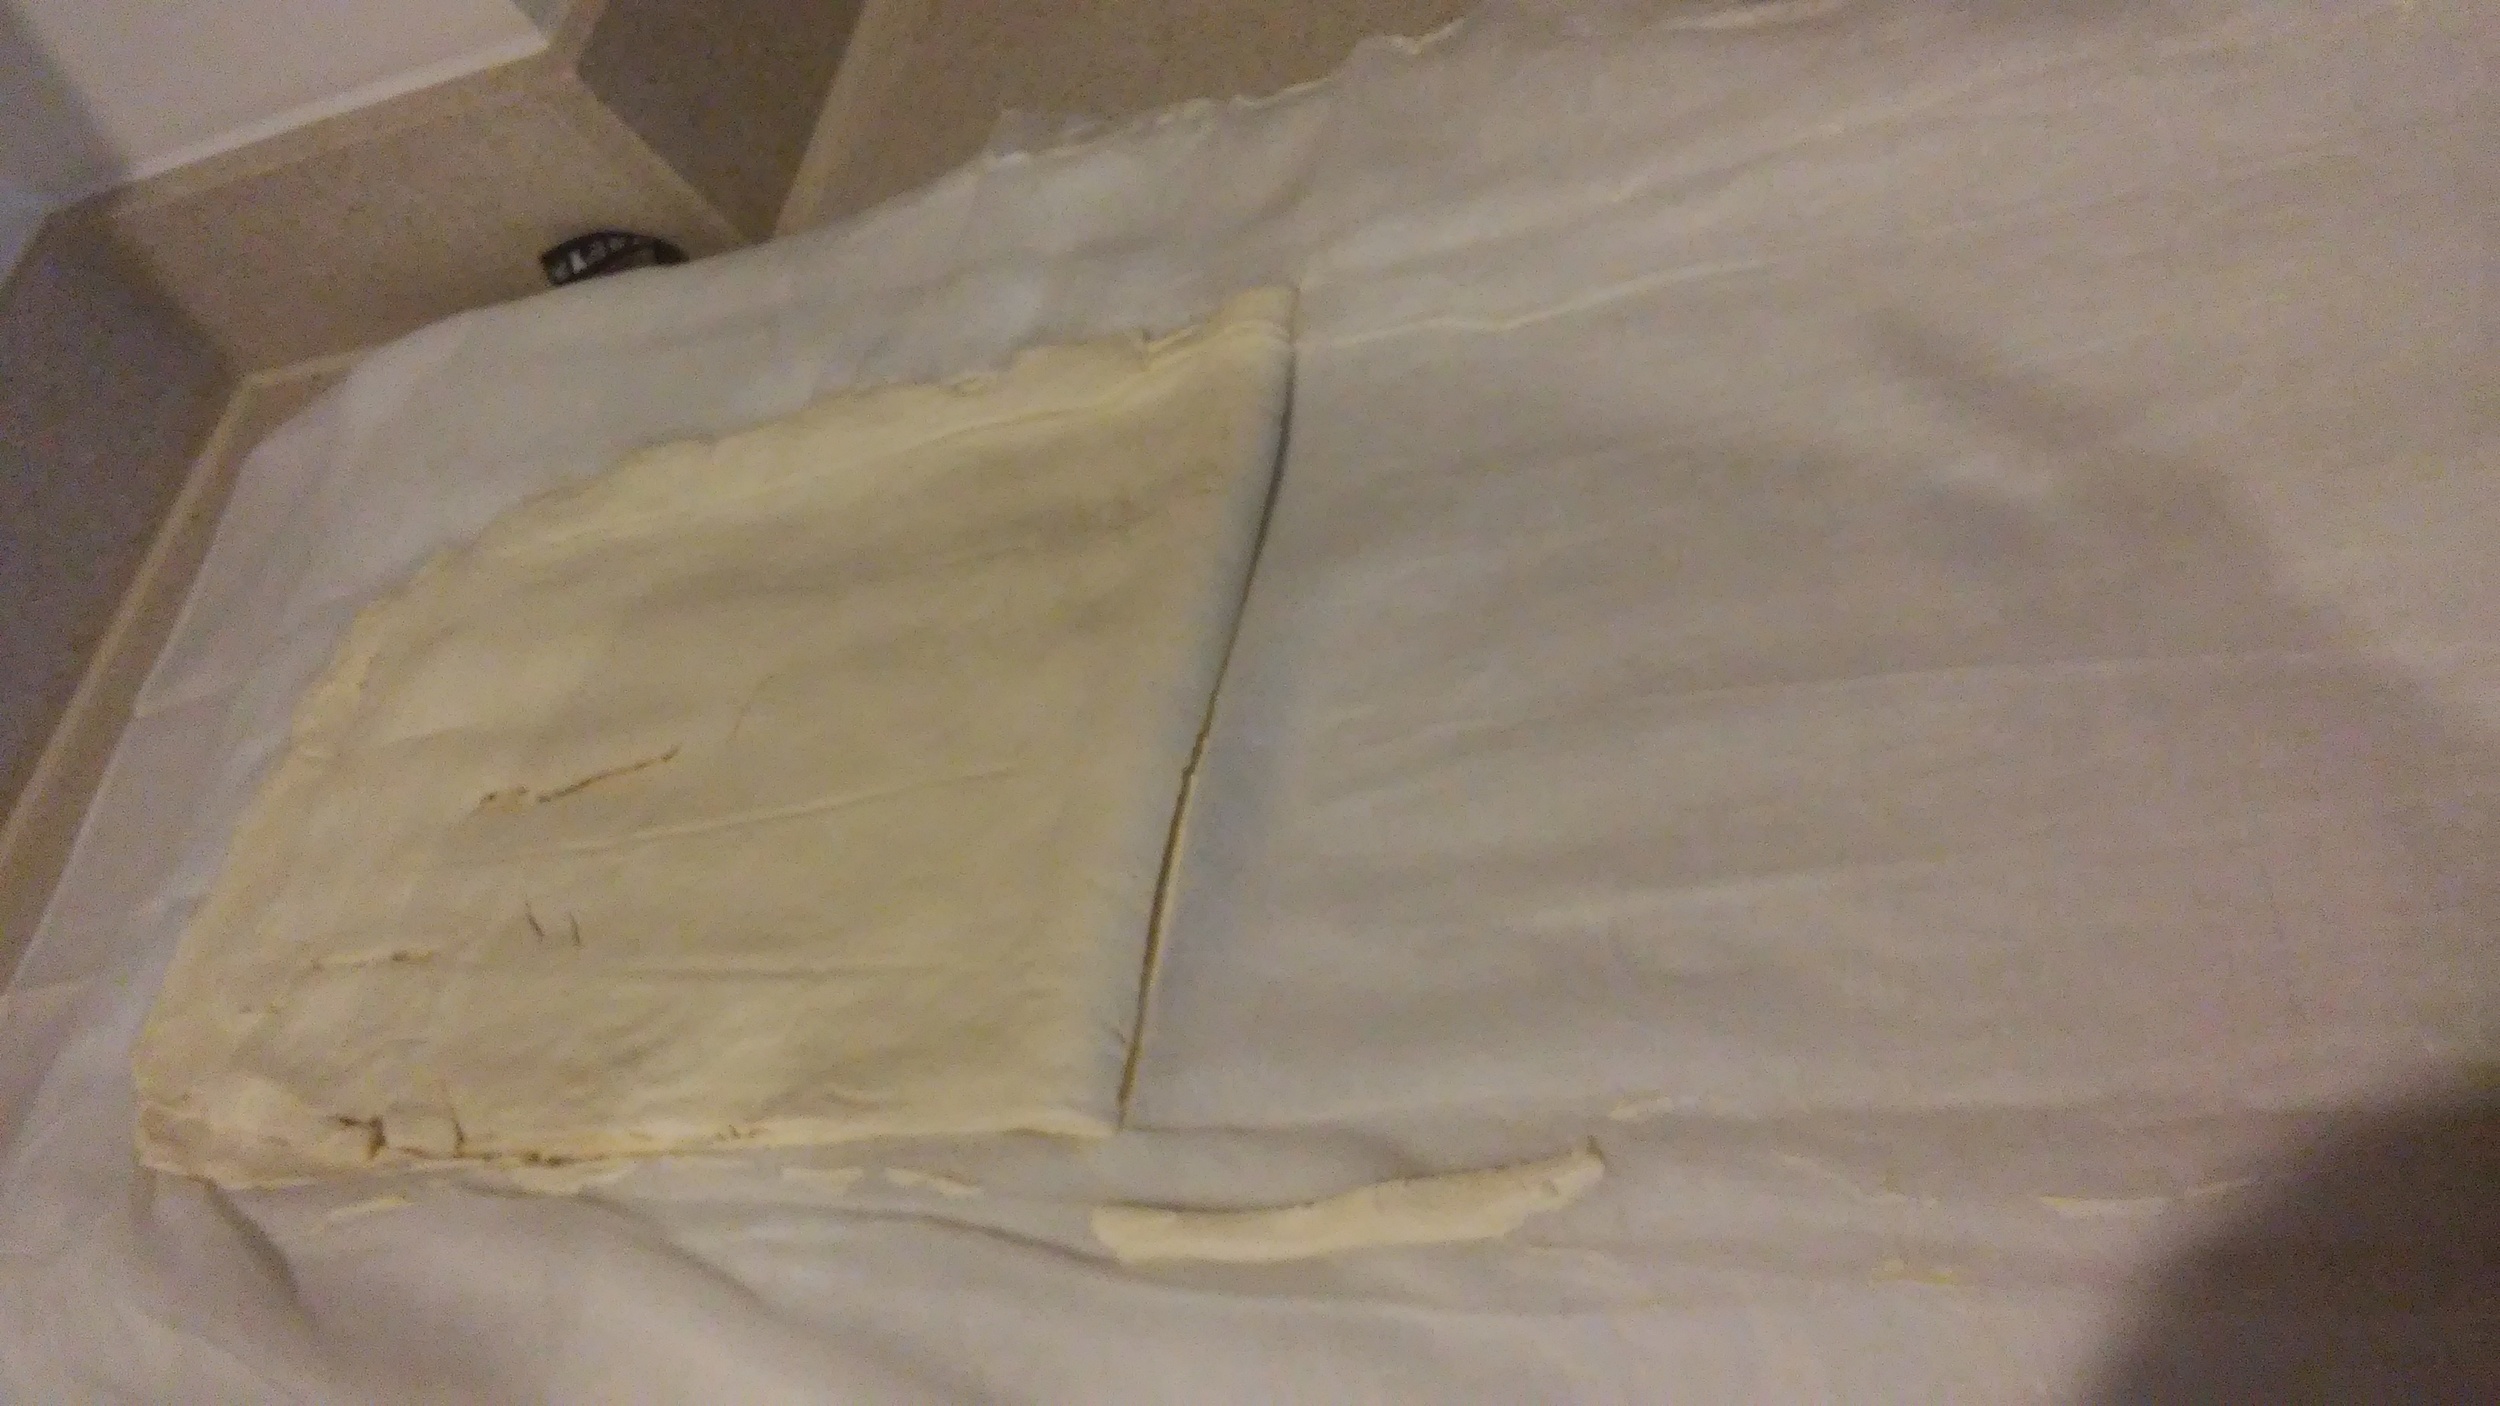 Muslin cloth pulled back, leaving the strained yoghurt on one side